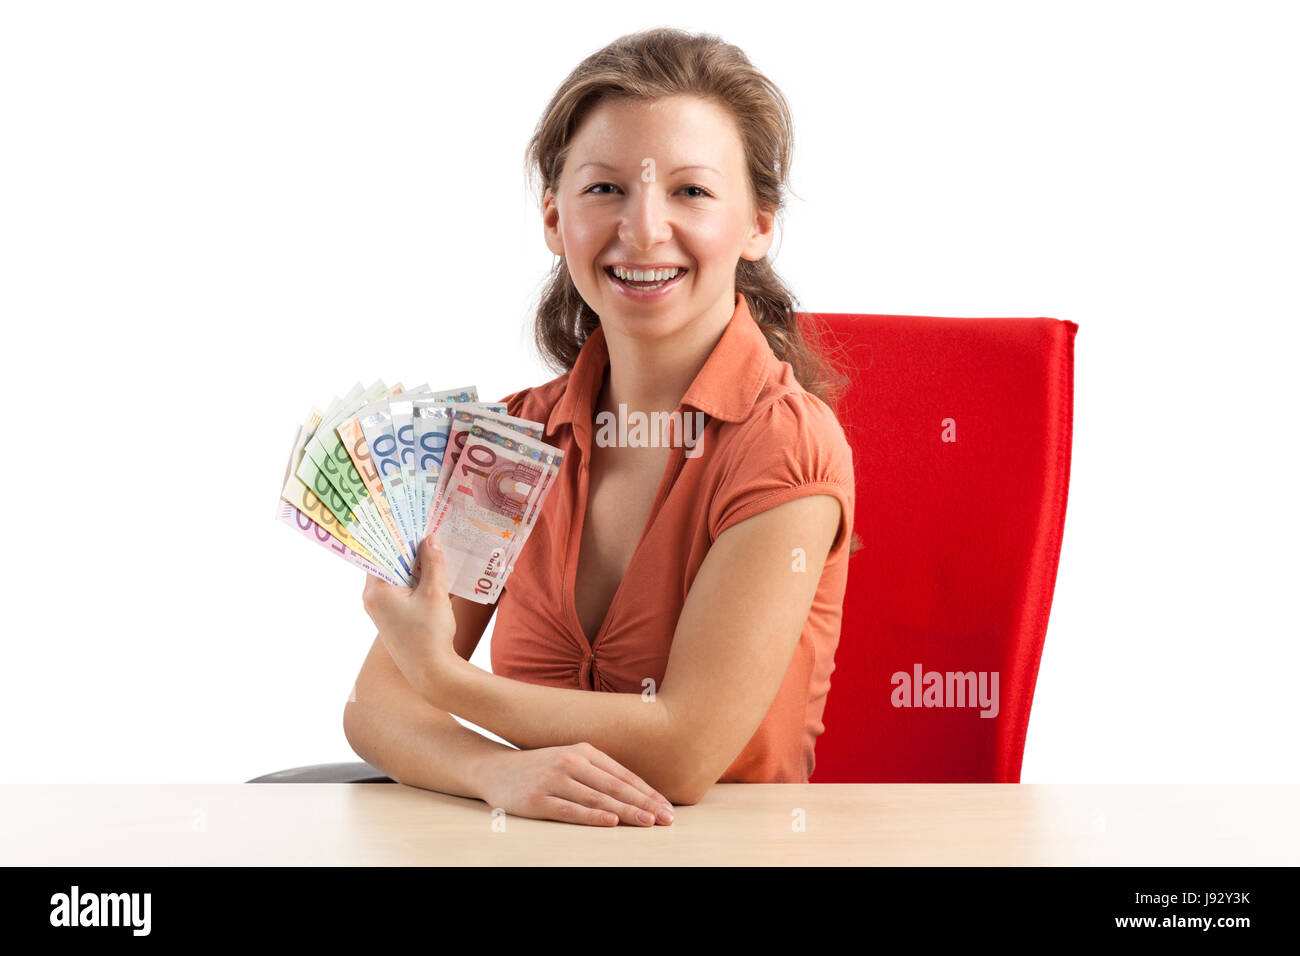 woman, provision, luxury, expenditure, pomp, affluence, magnificence, Stock Photo